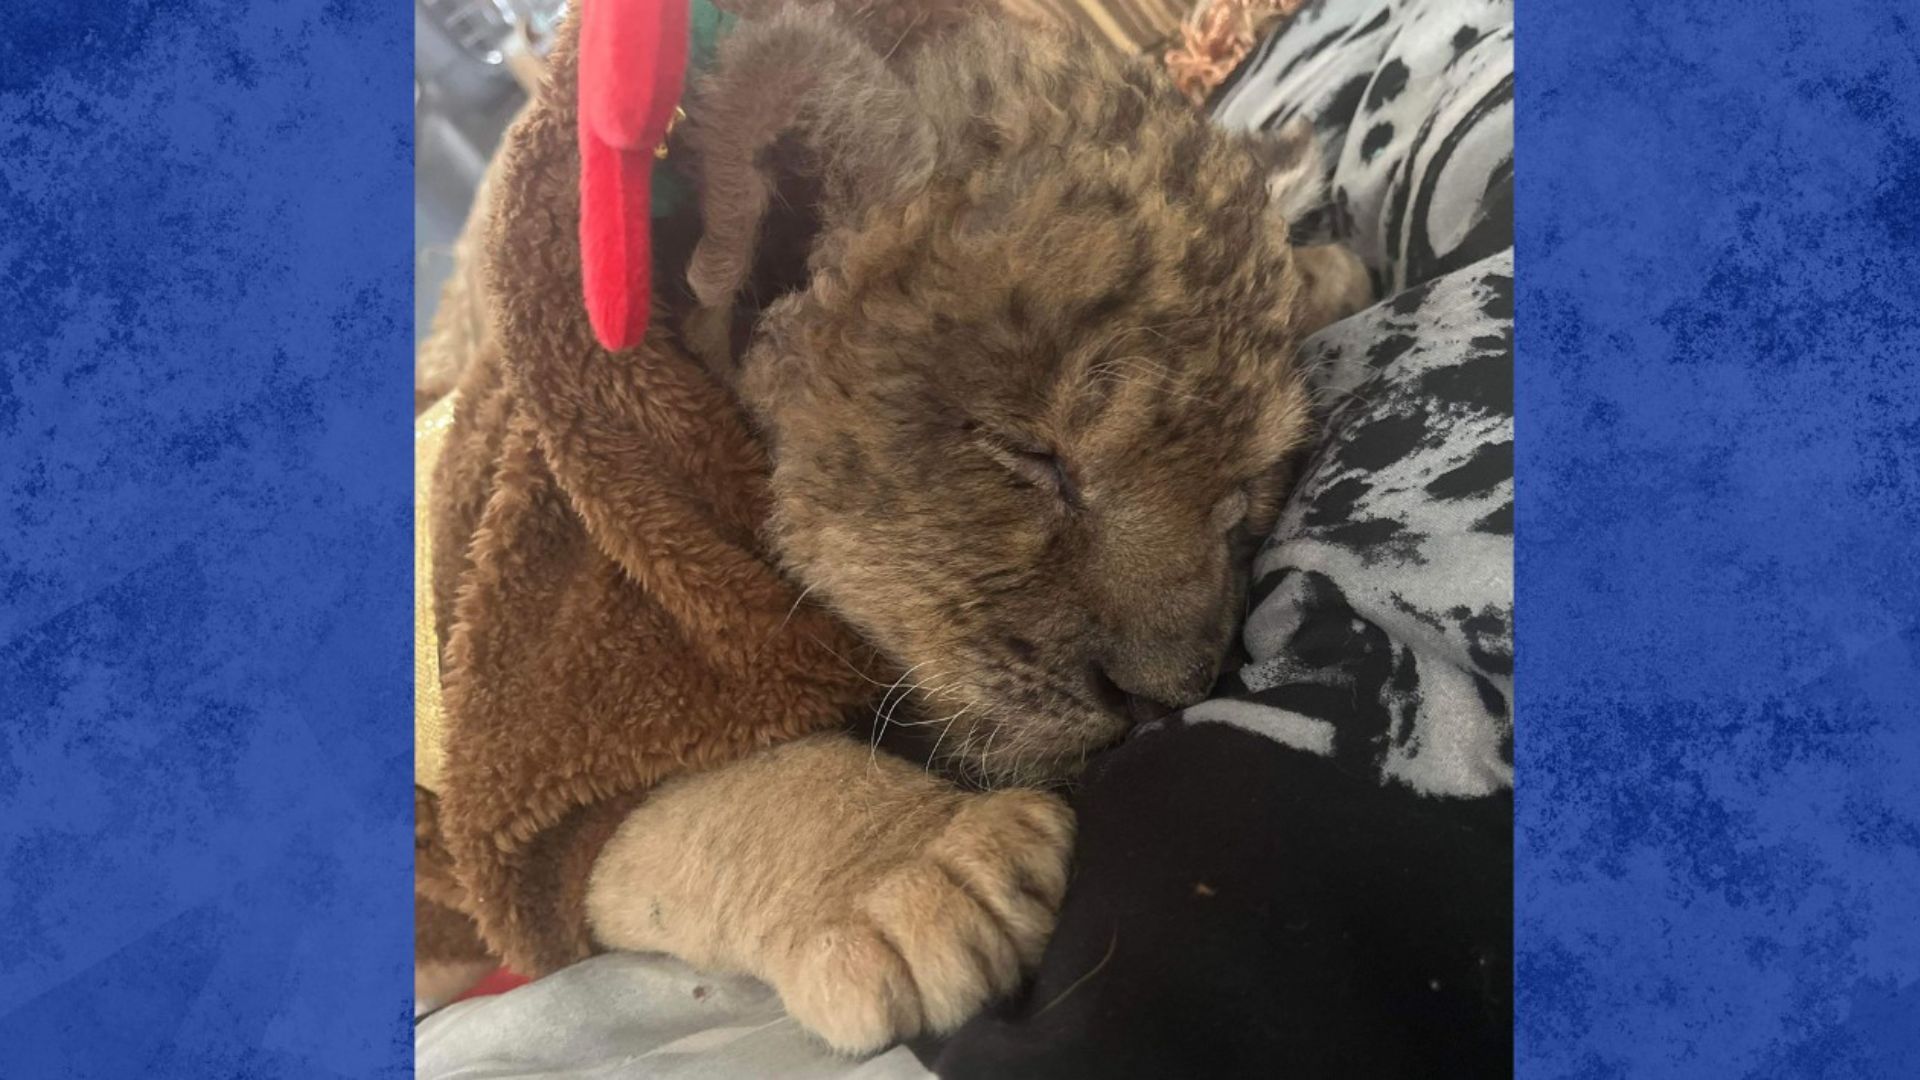 The custody of a lion cub is at the center of a legal battle